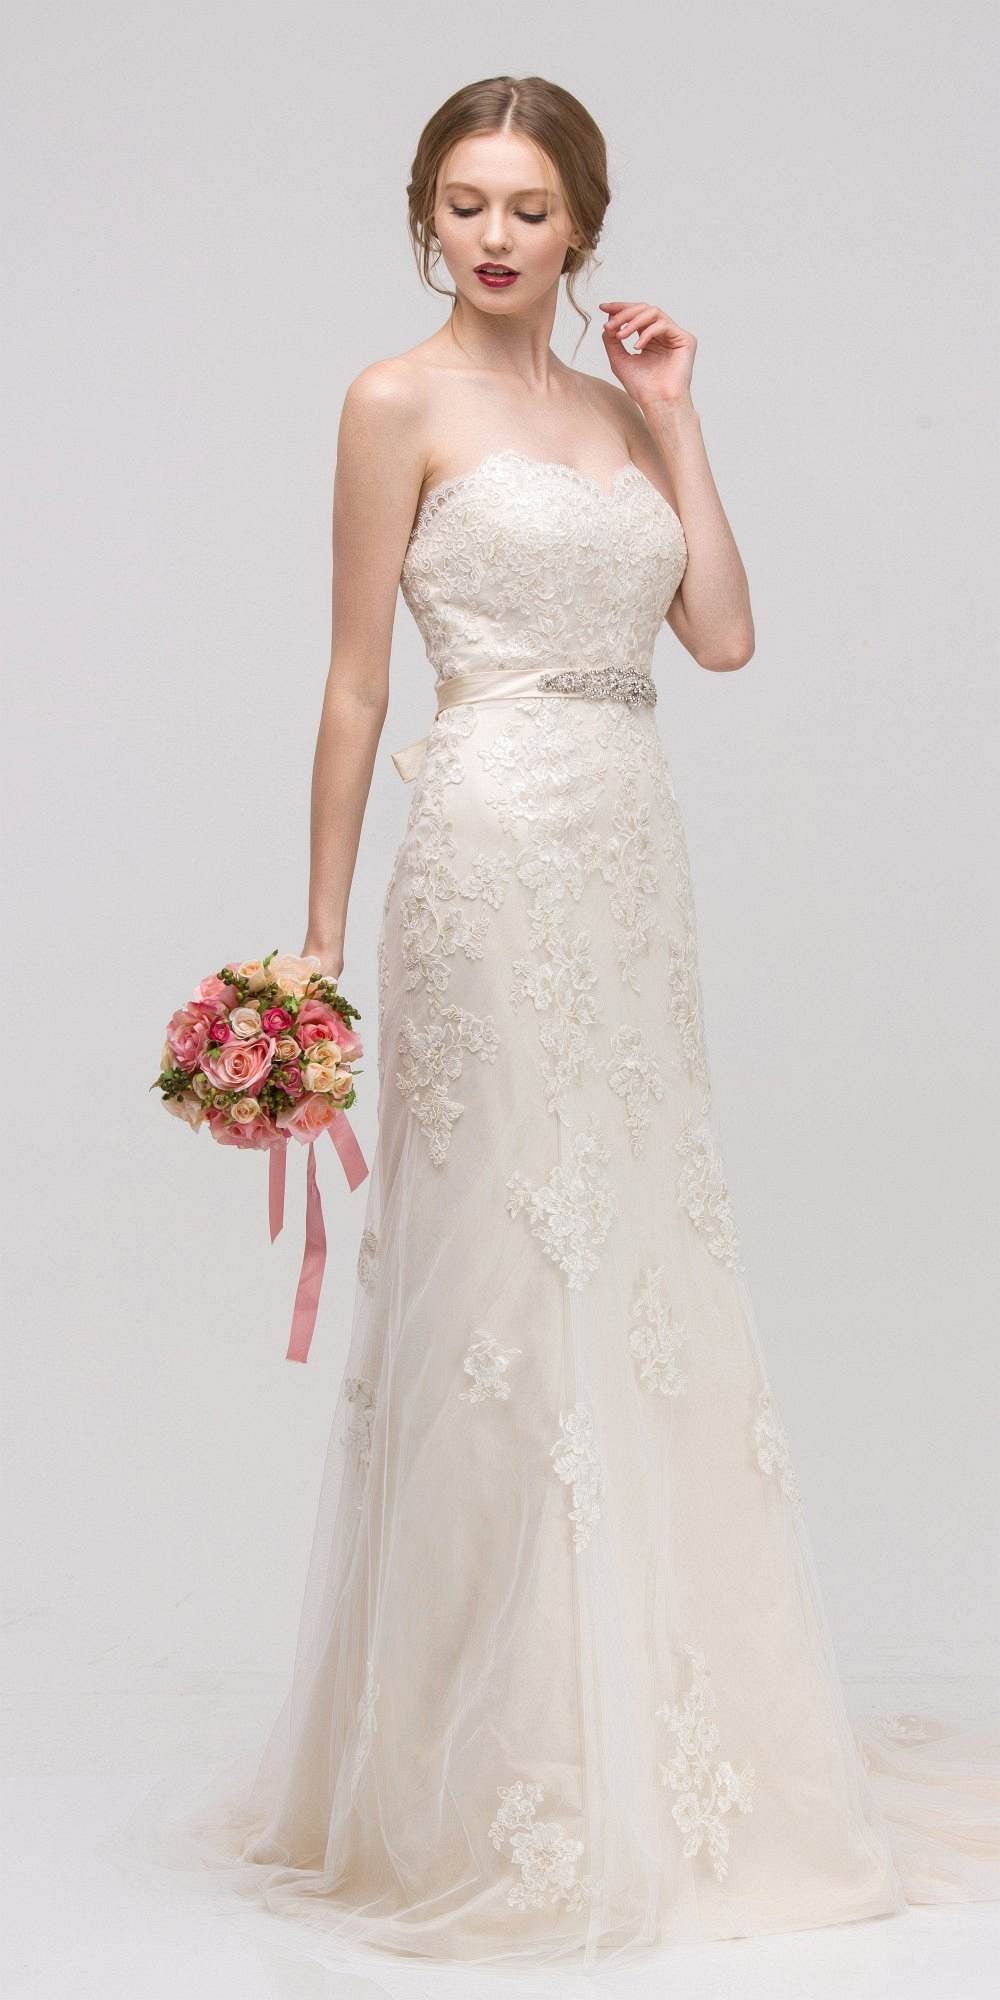 Sweetheart Neckline Fit and Flare Bridal Gown Embellished Waist Ivory/Gold